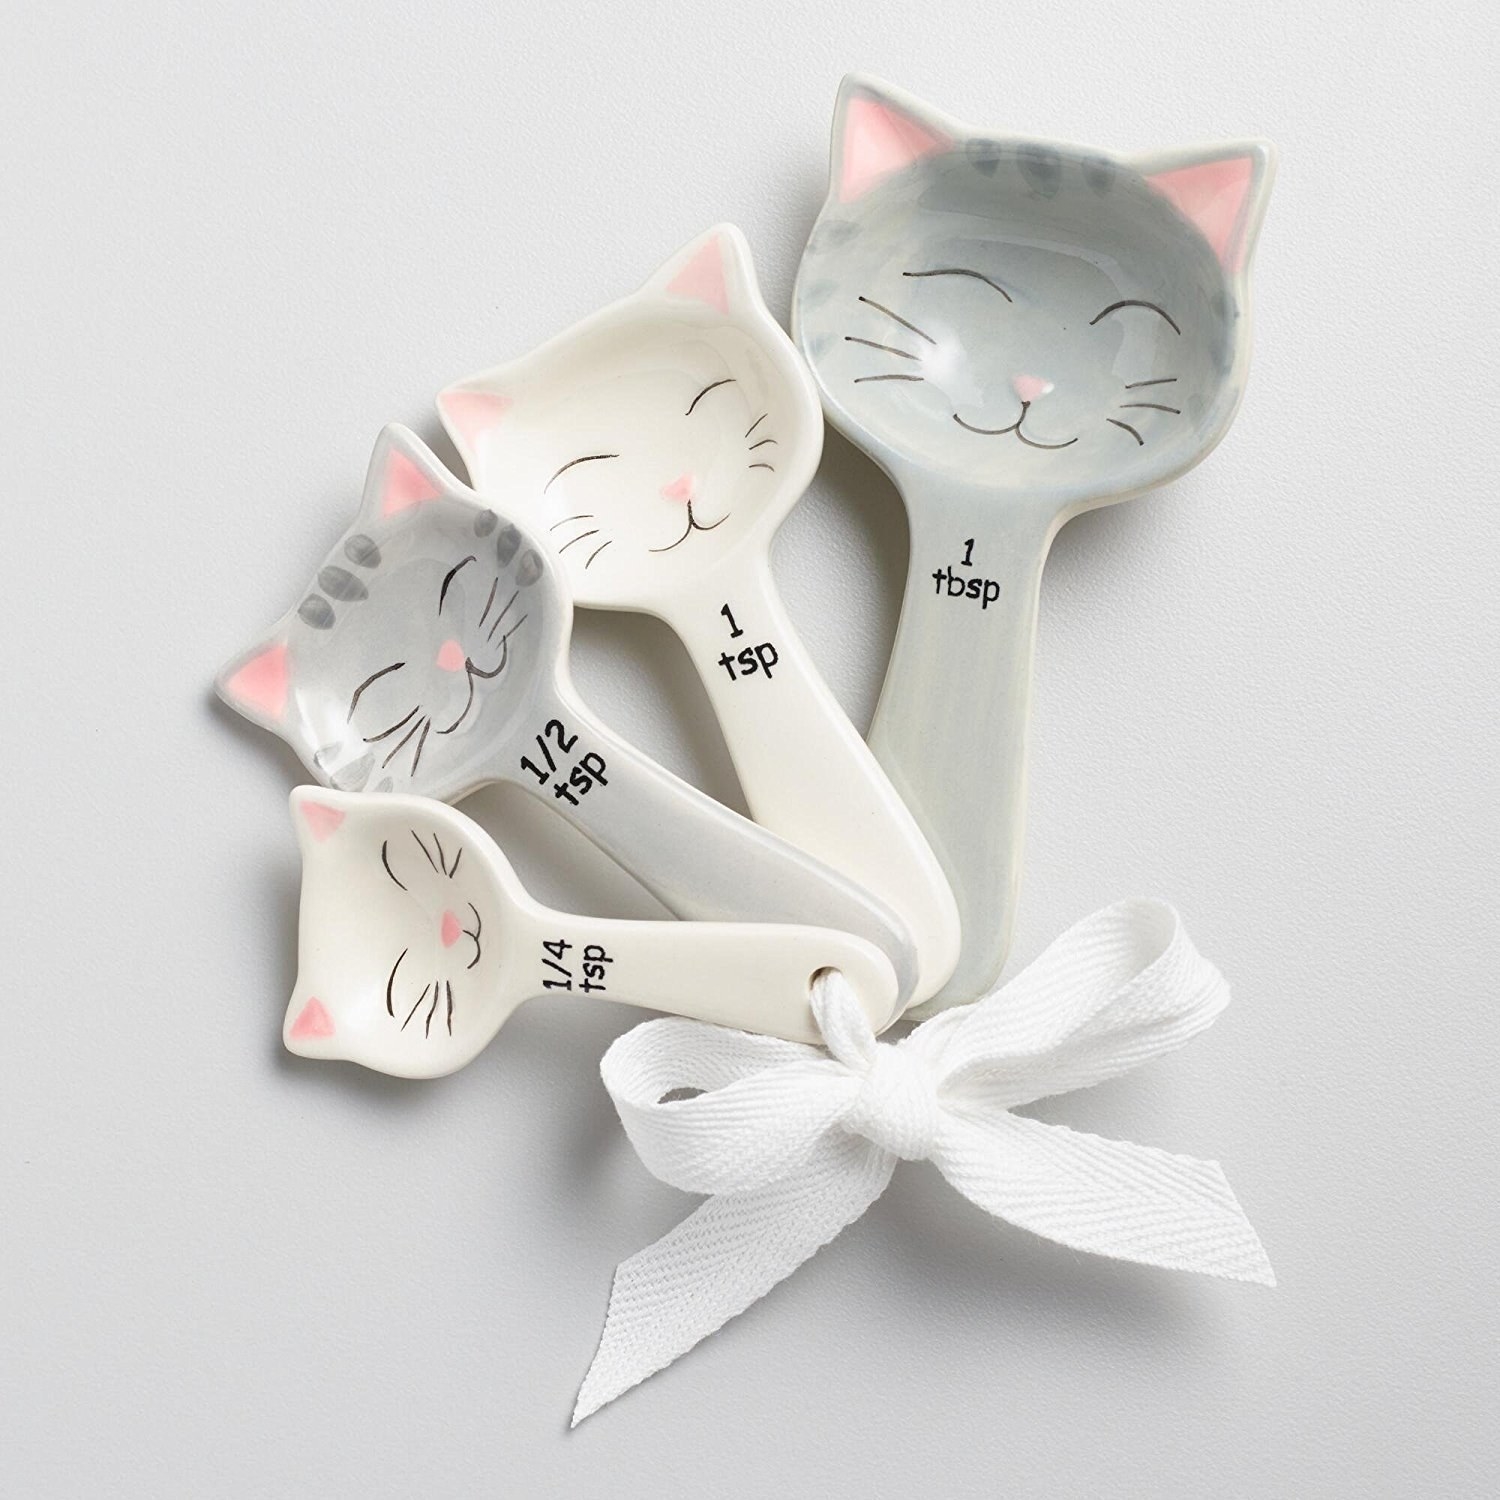 A set of 1/4 tsp, 1/2 tsp, 1 tsp, and 1 tbsp measuring spoons with happy cat faces painted on them tied with a white ribbon